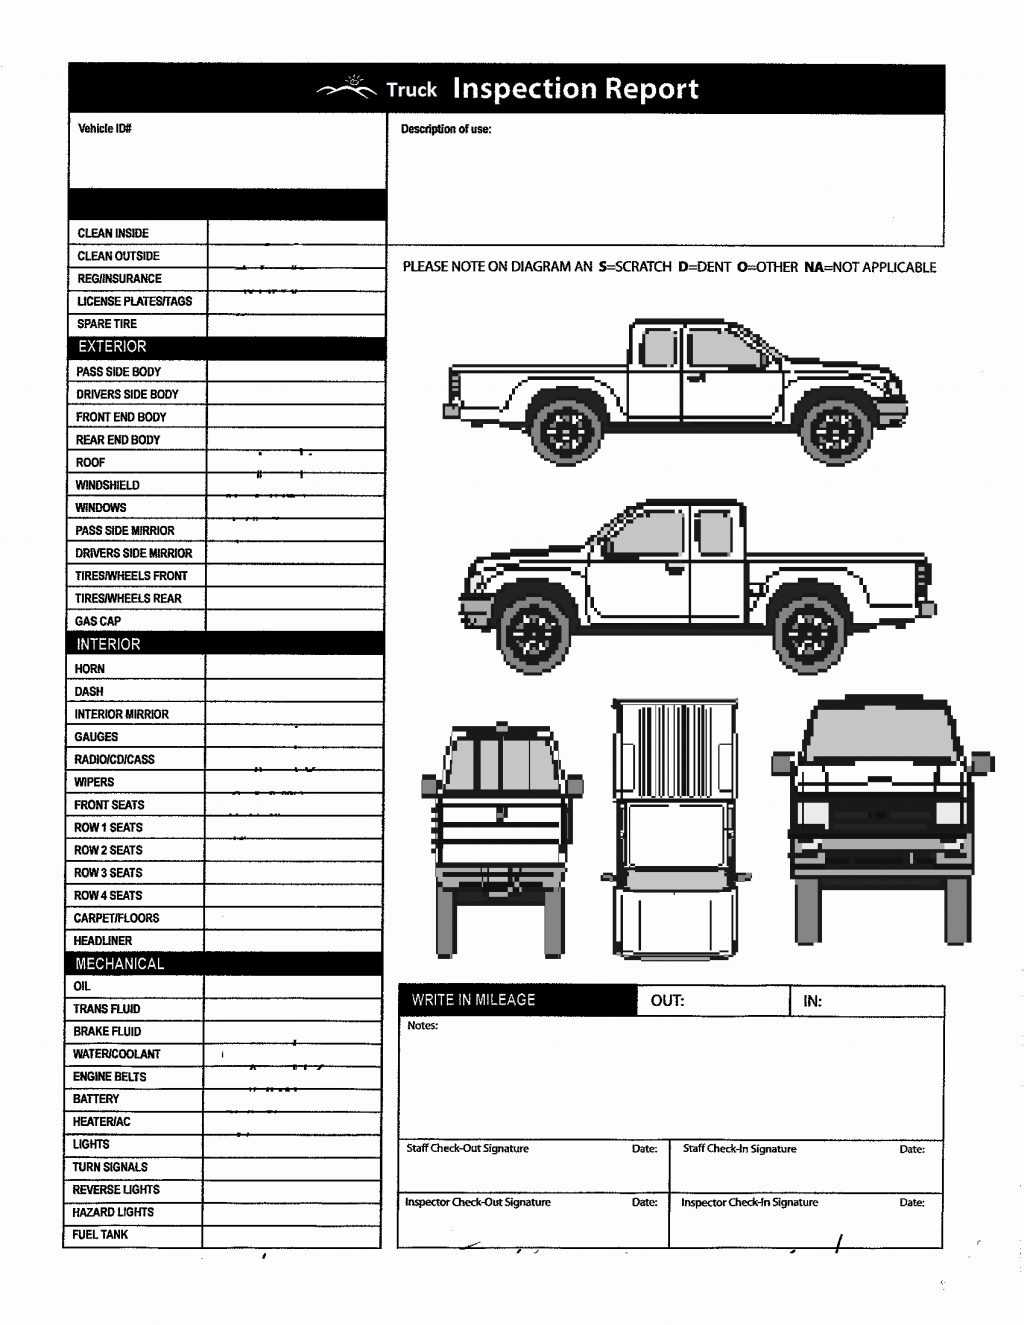 Inspection Spreadsheet Template Vehicle Checklist Excel Intended For Vehicle Checklist Template Word